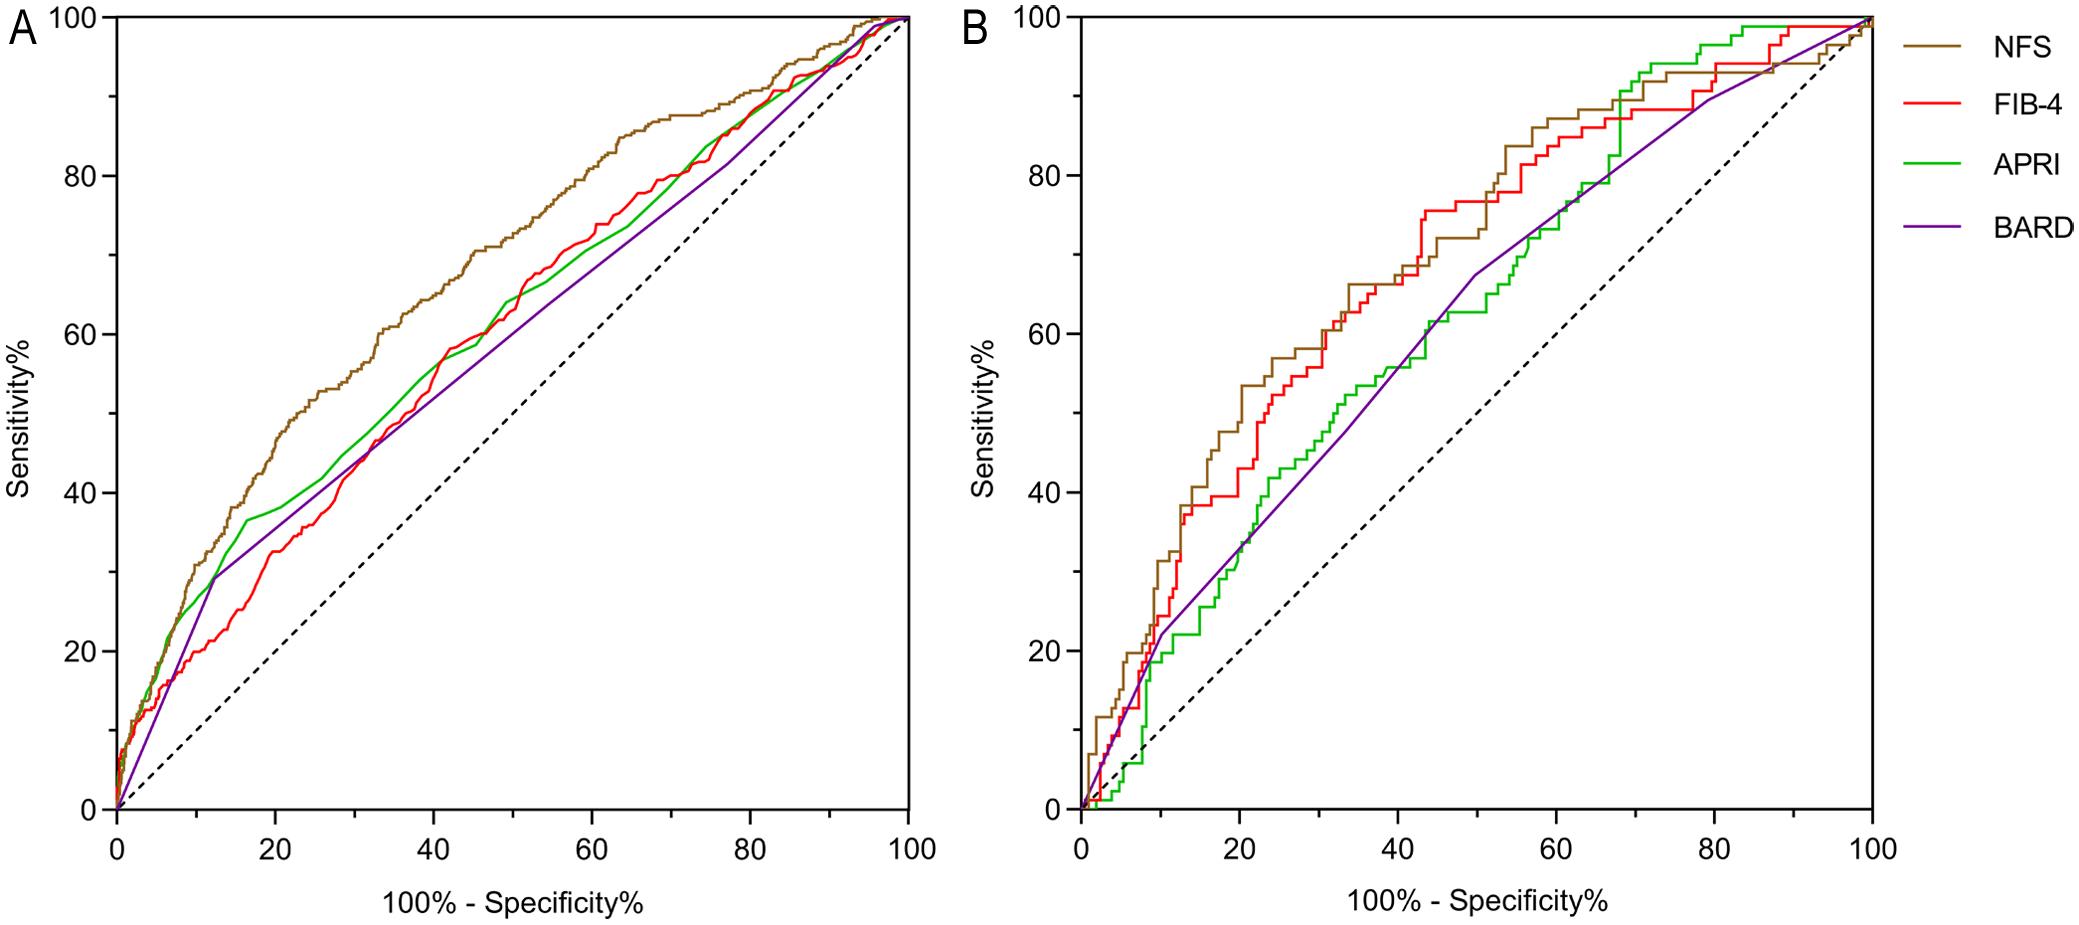 ROC curves of different scoring systems for advanced fibrosis in the two cohorts.